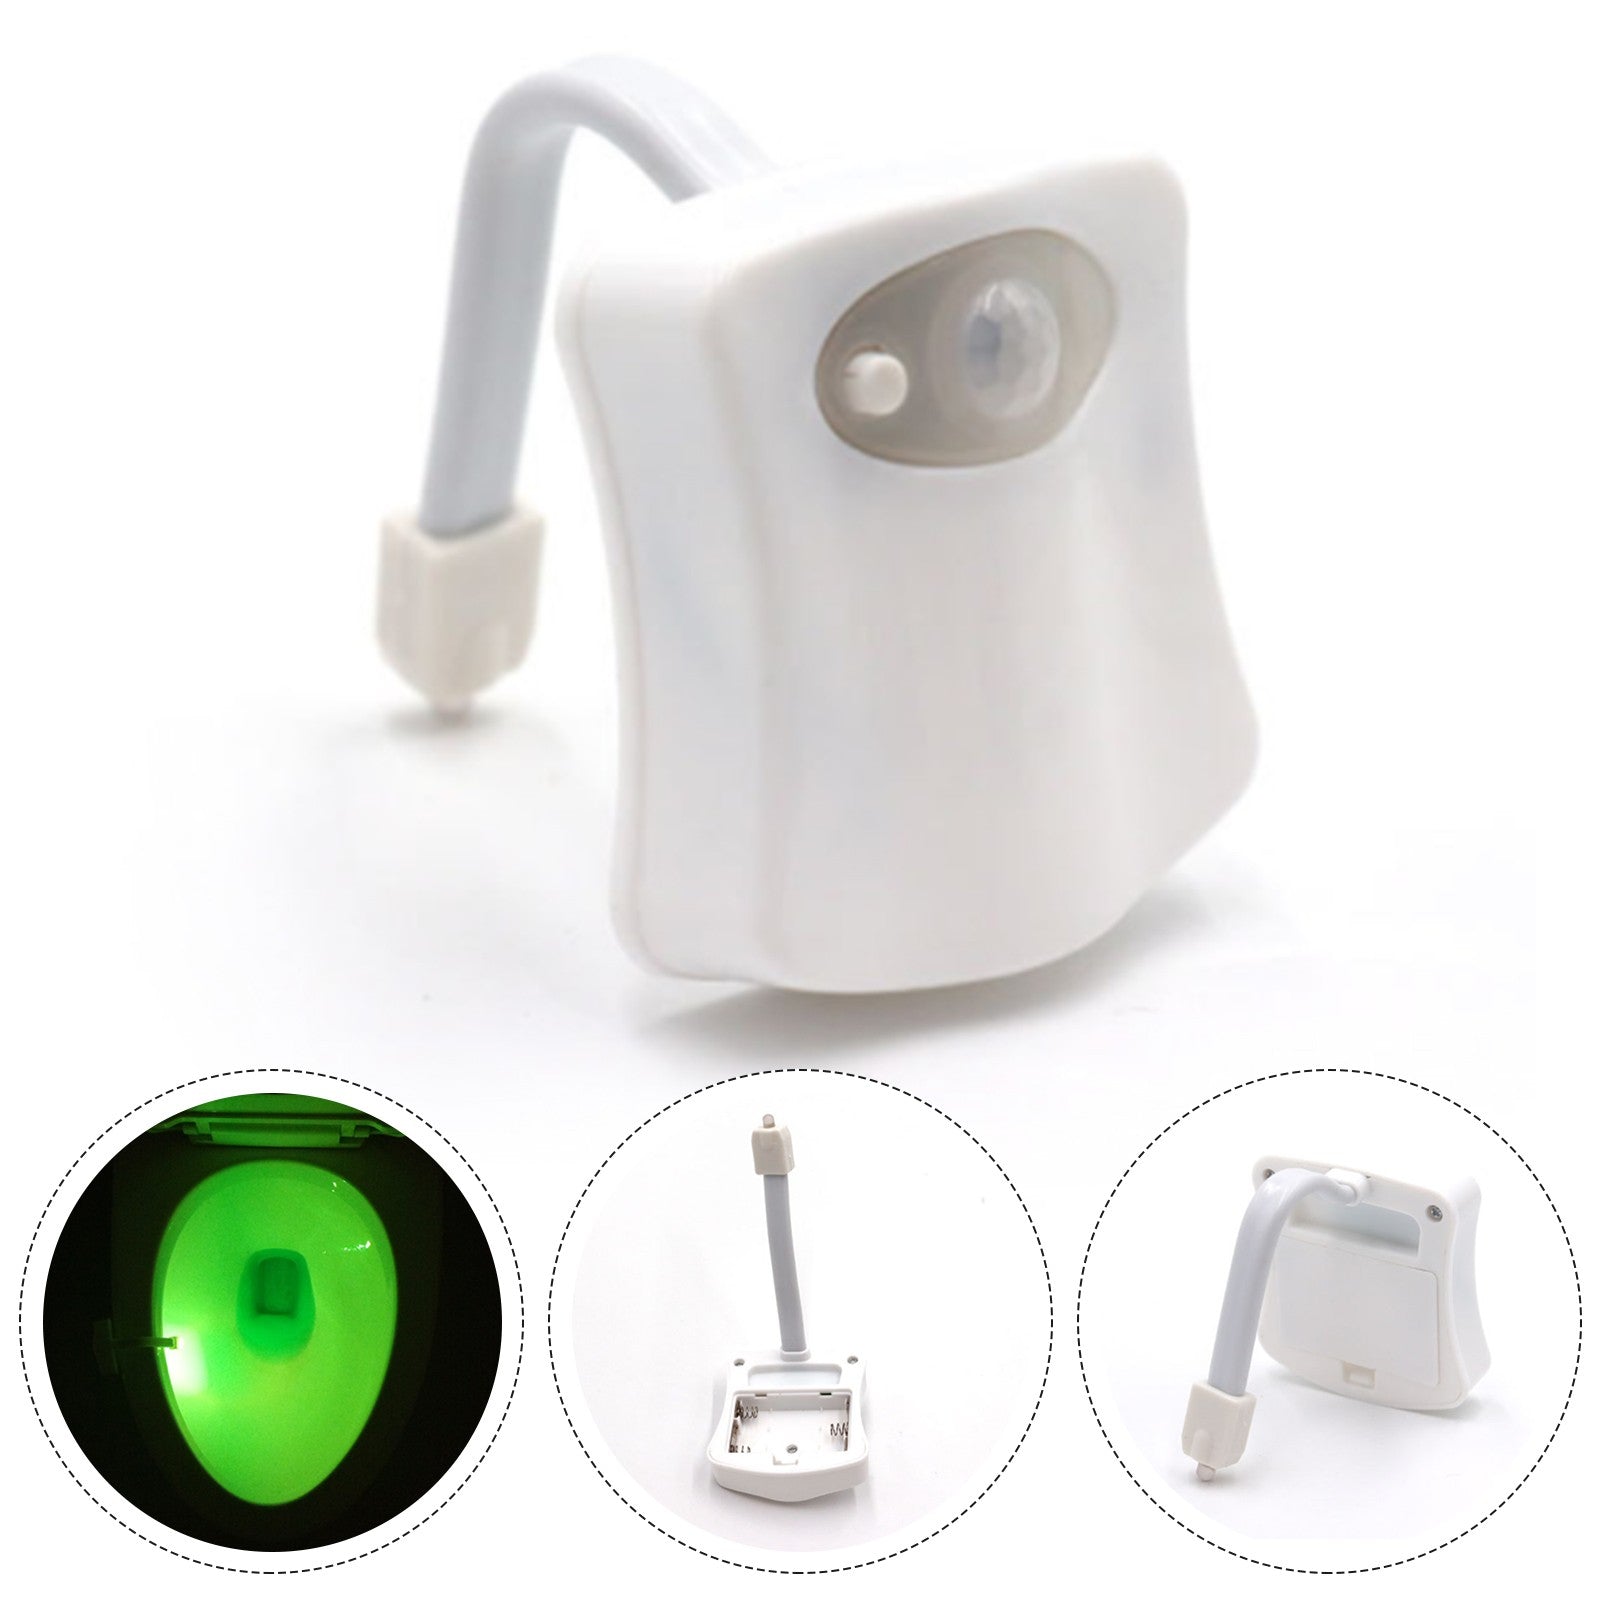  LED Toilet Night Light with 16 Colors.